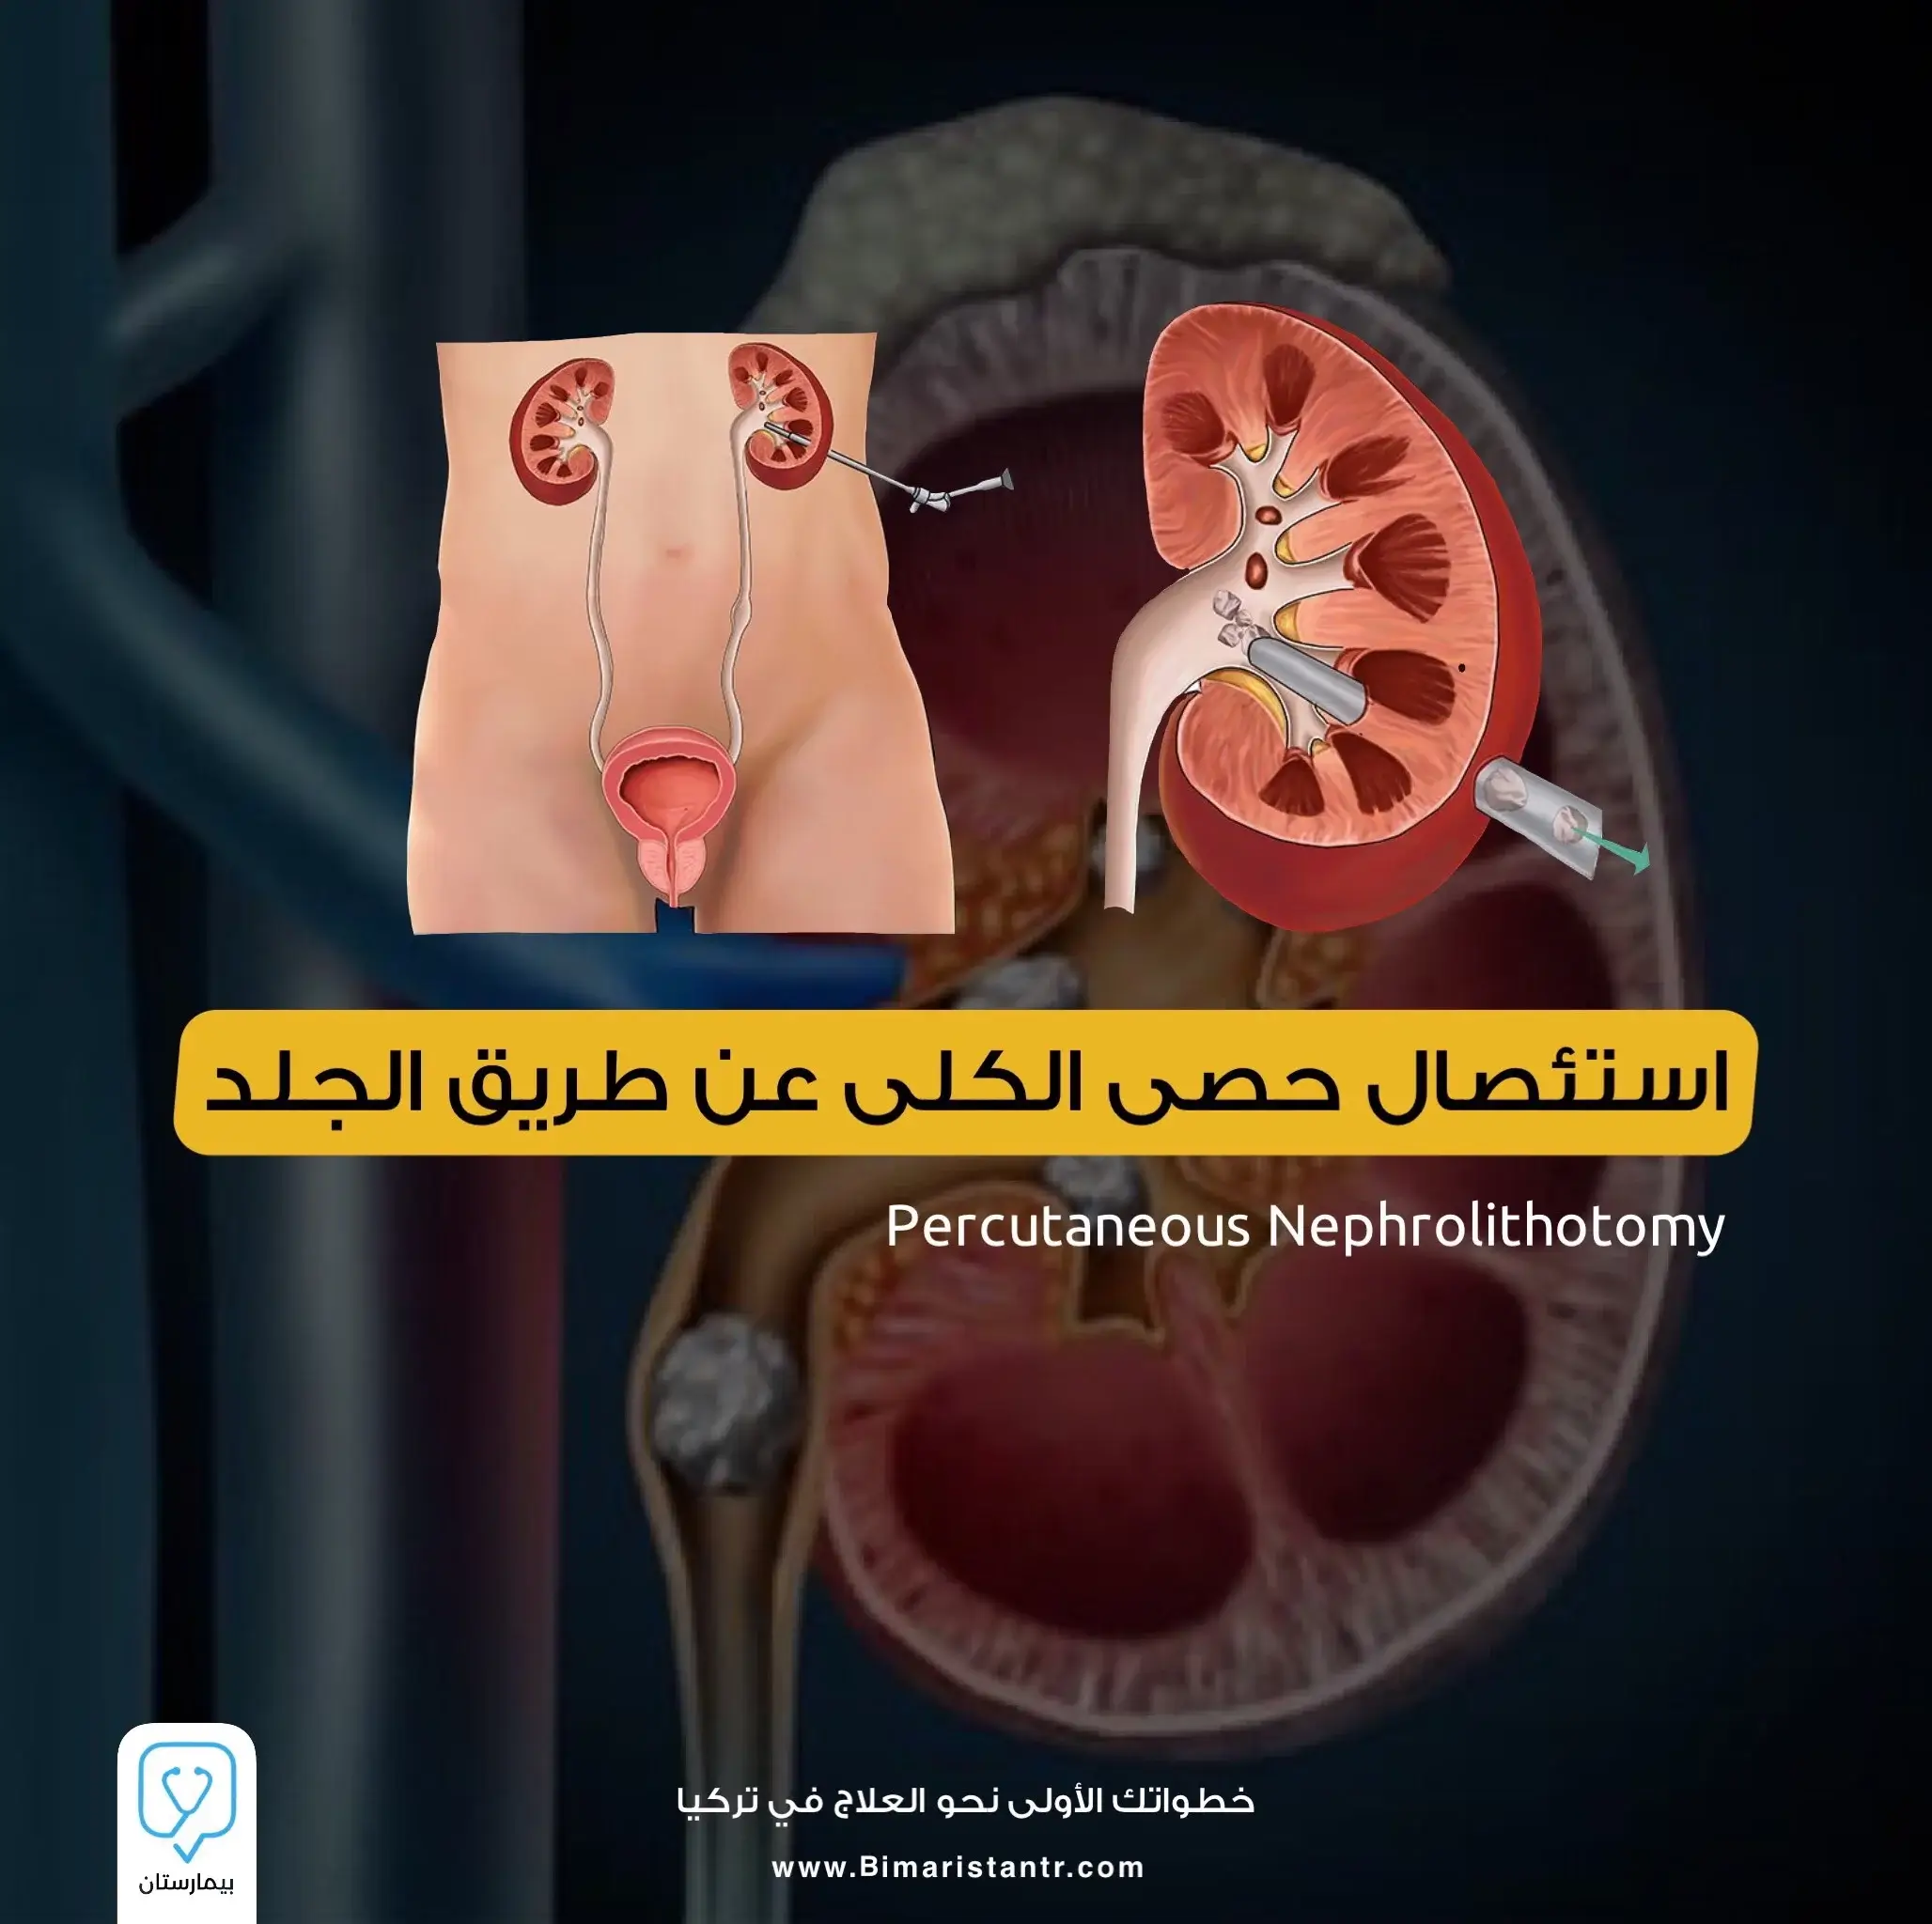 Percutaneous resection of kidney stones in Turkey